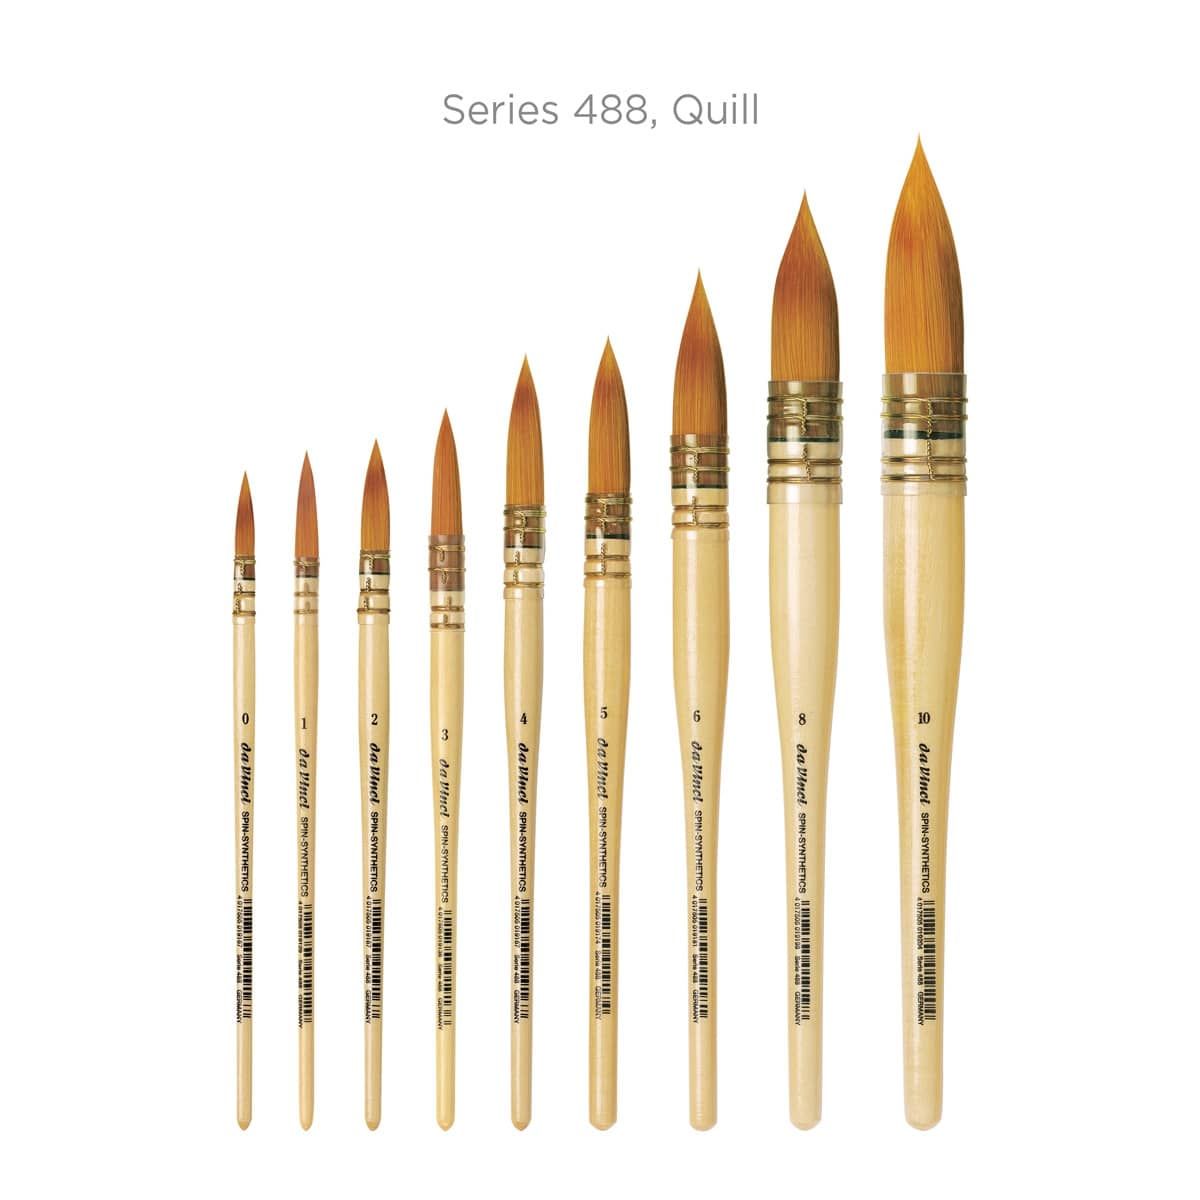 Series 488 Quill Brushes